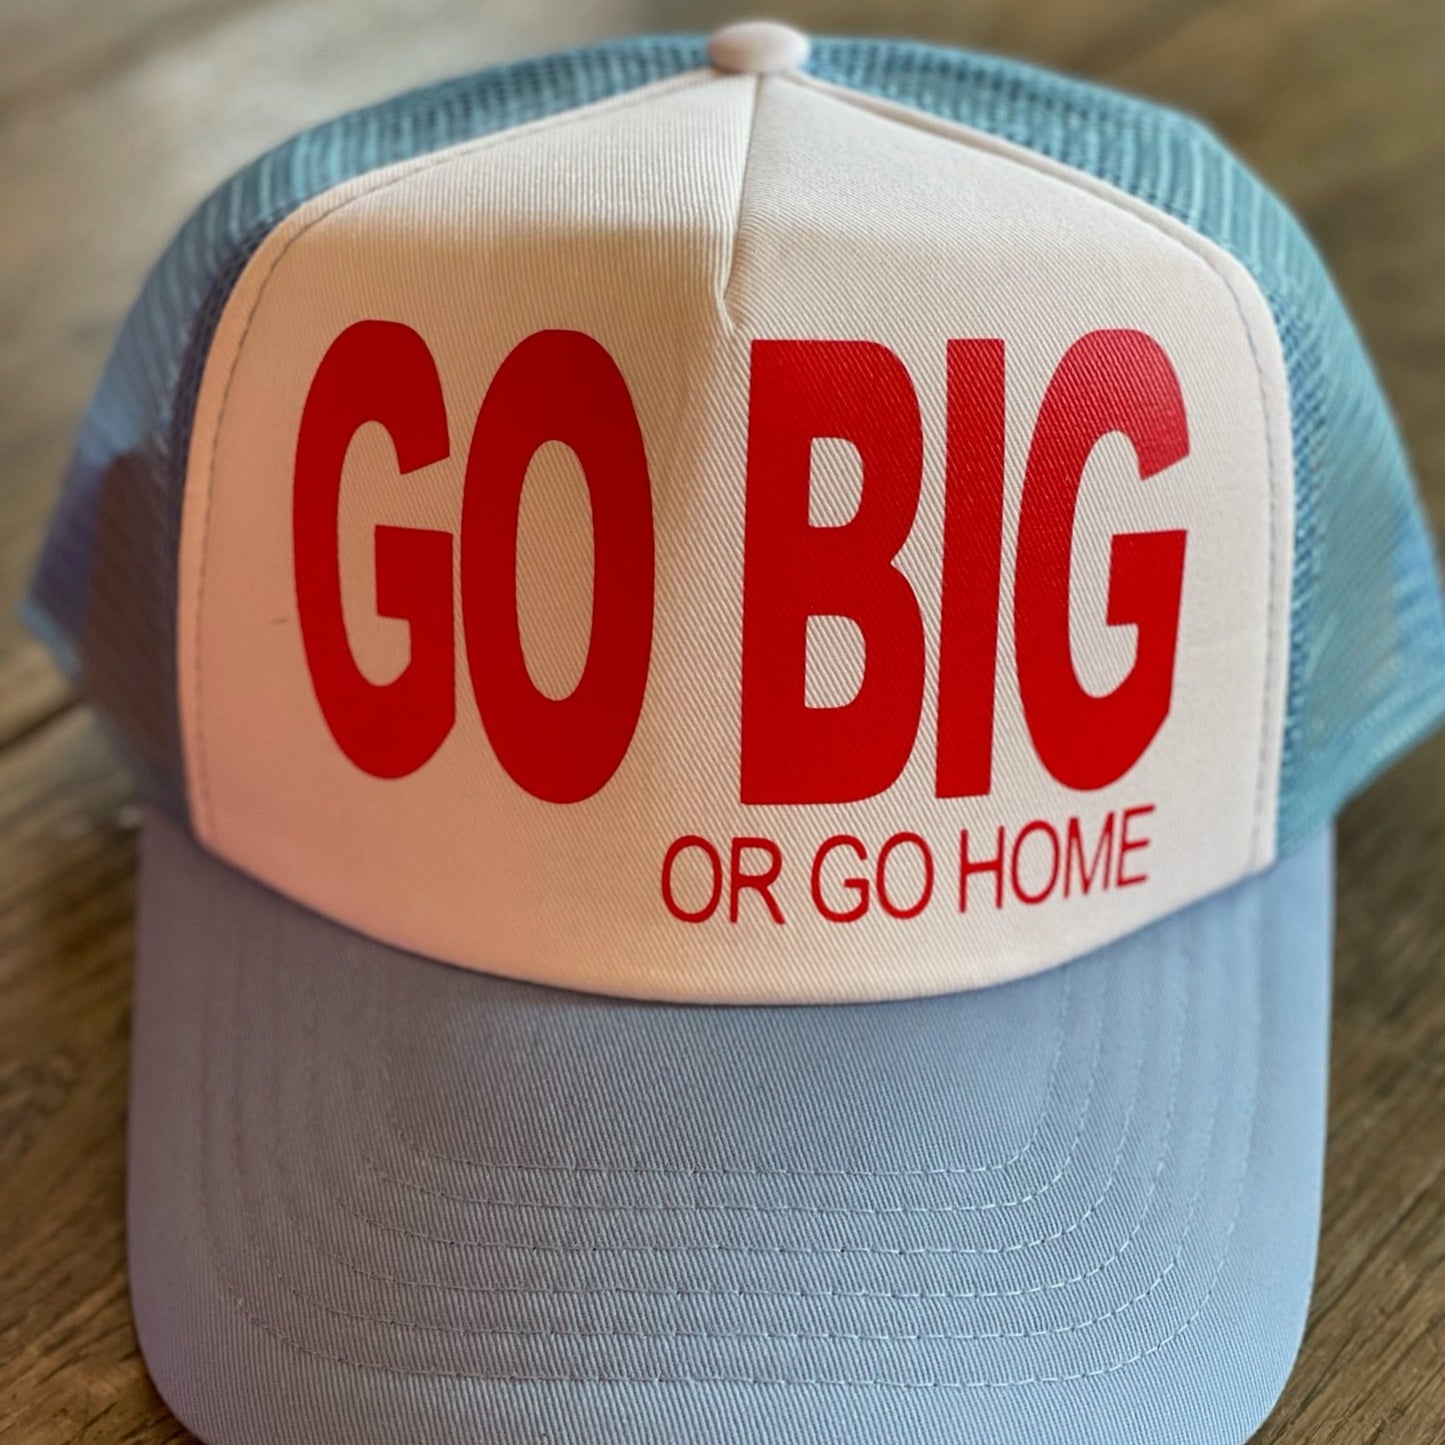 Go Big or Go Home - Blue and White Hat